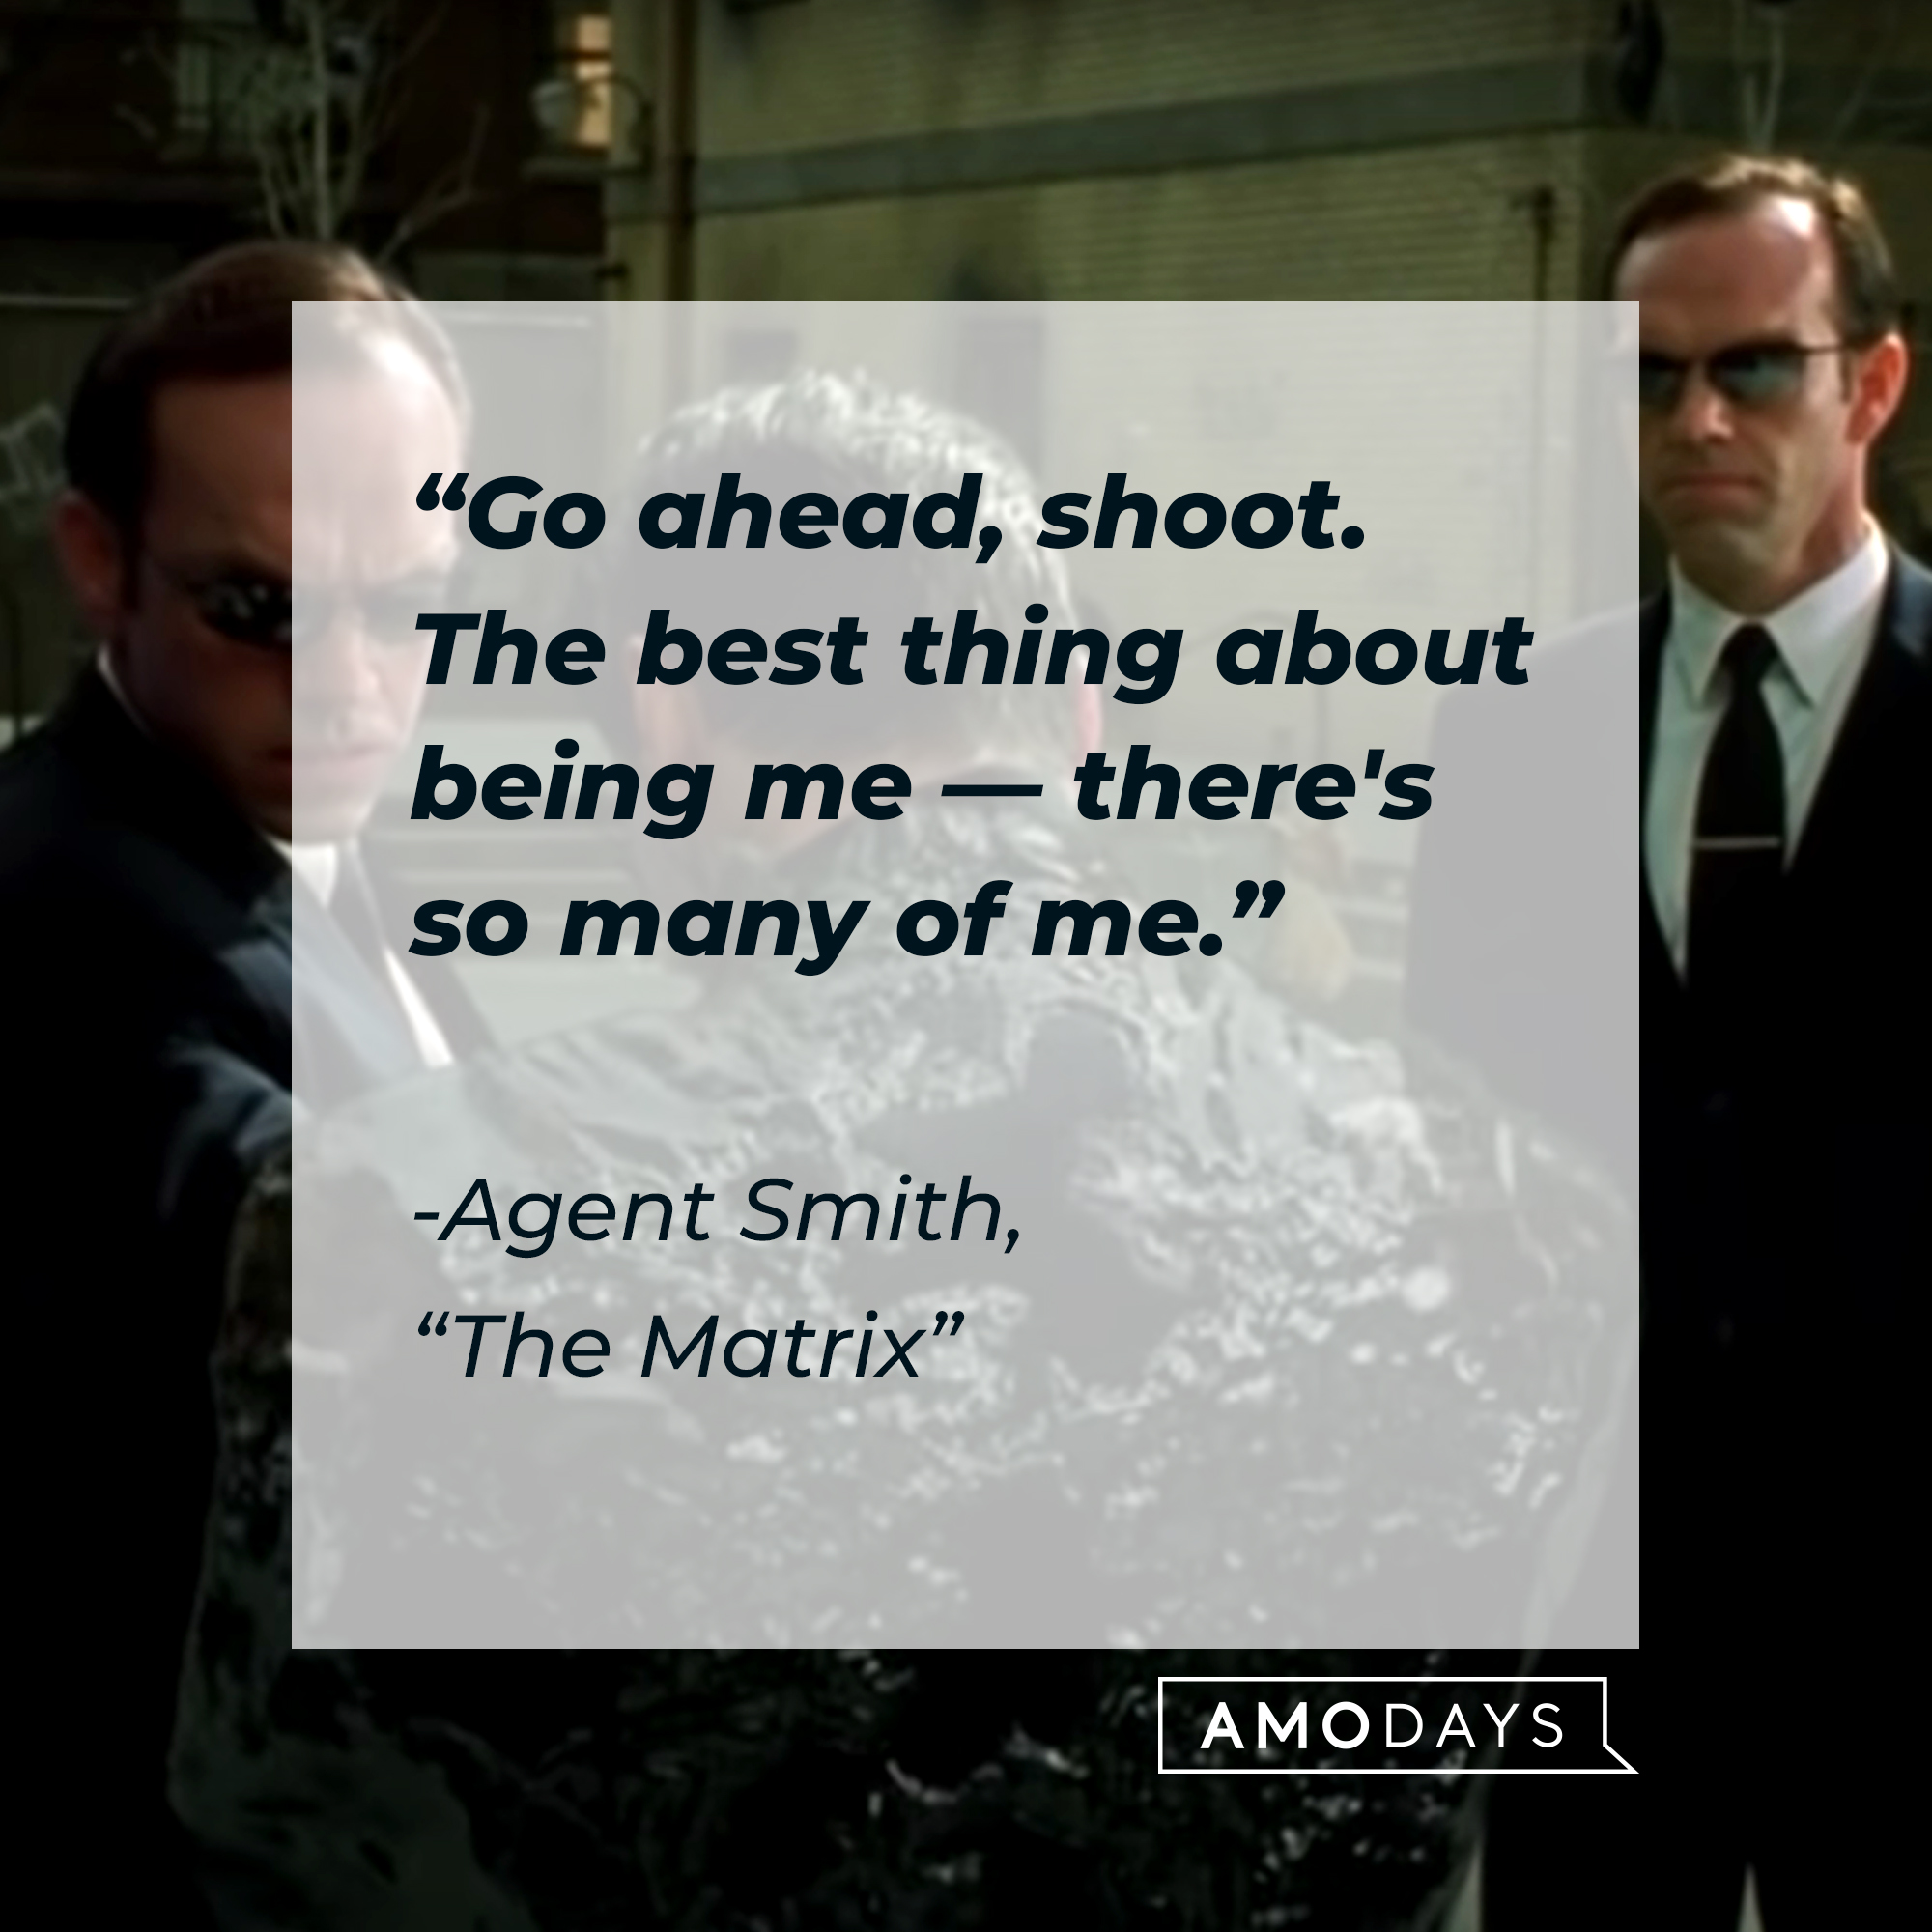 Agent Smith with his quote: "Go ahead, shoot. The best thing about being me ― there's so many of me." | Source: Facebook.com/TheMatrixMovie